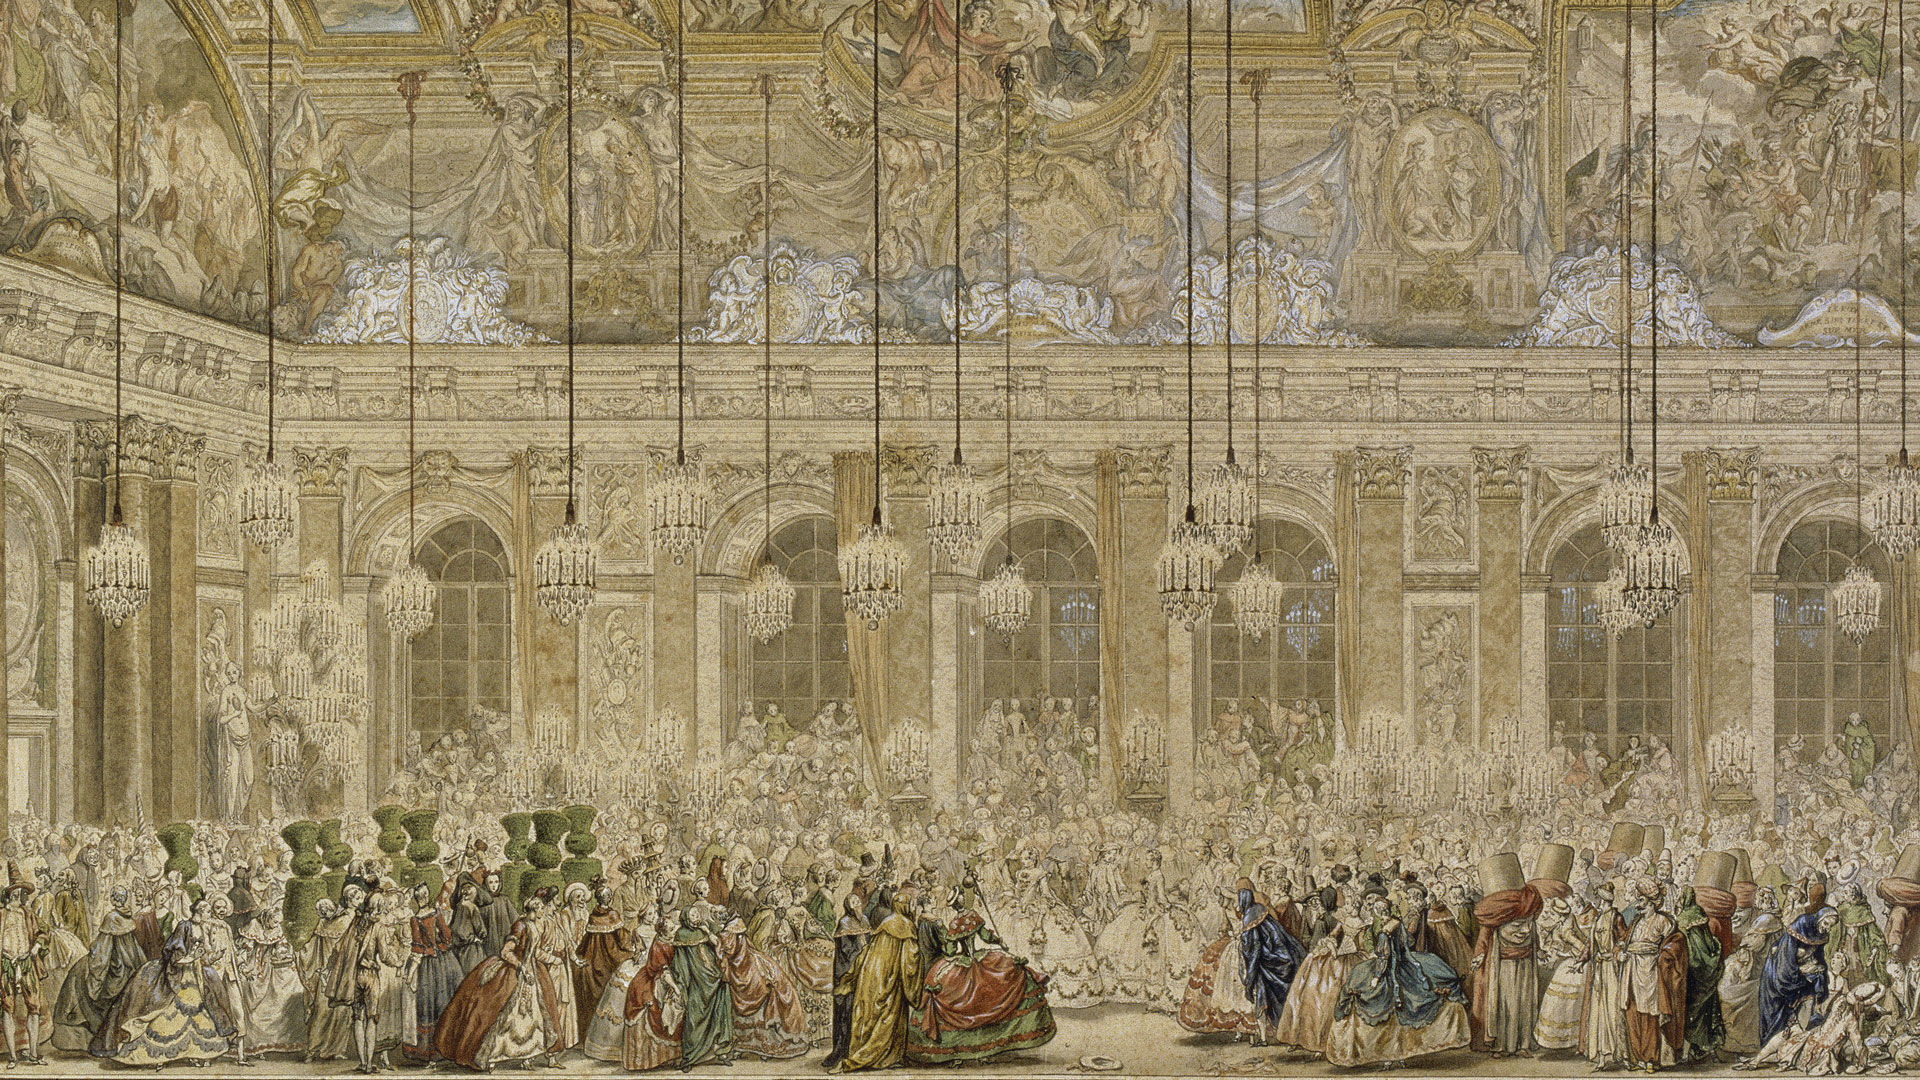 How Versailles' Over-the-Top Opulence Drove the French to Revolt